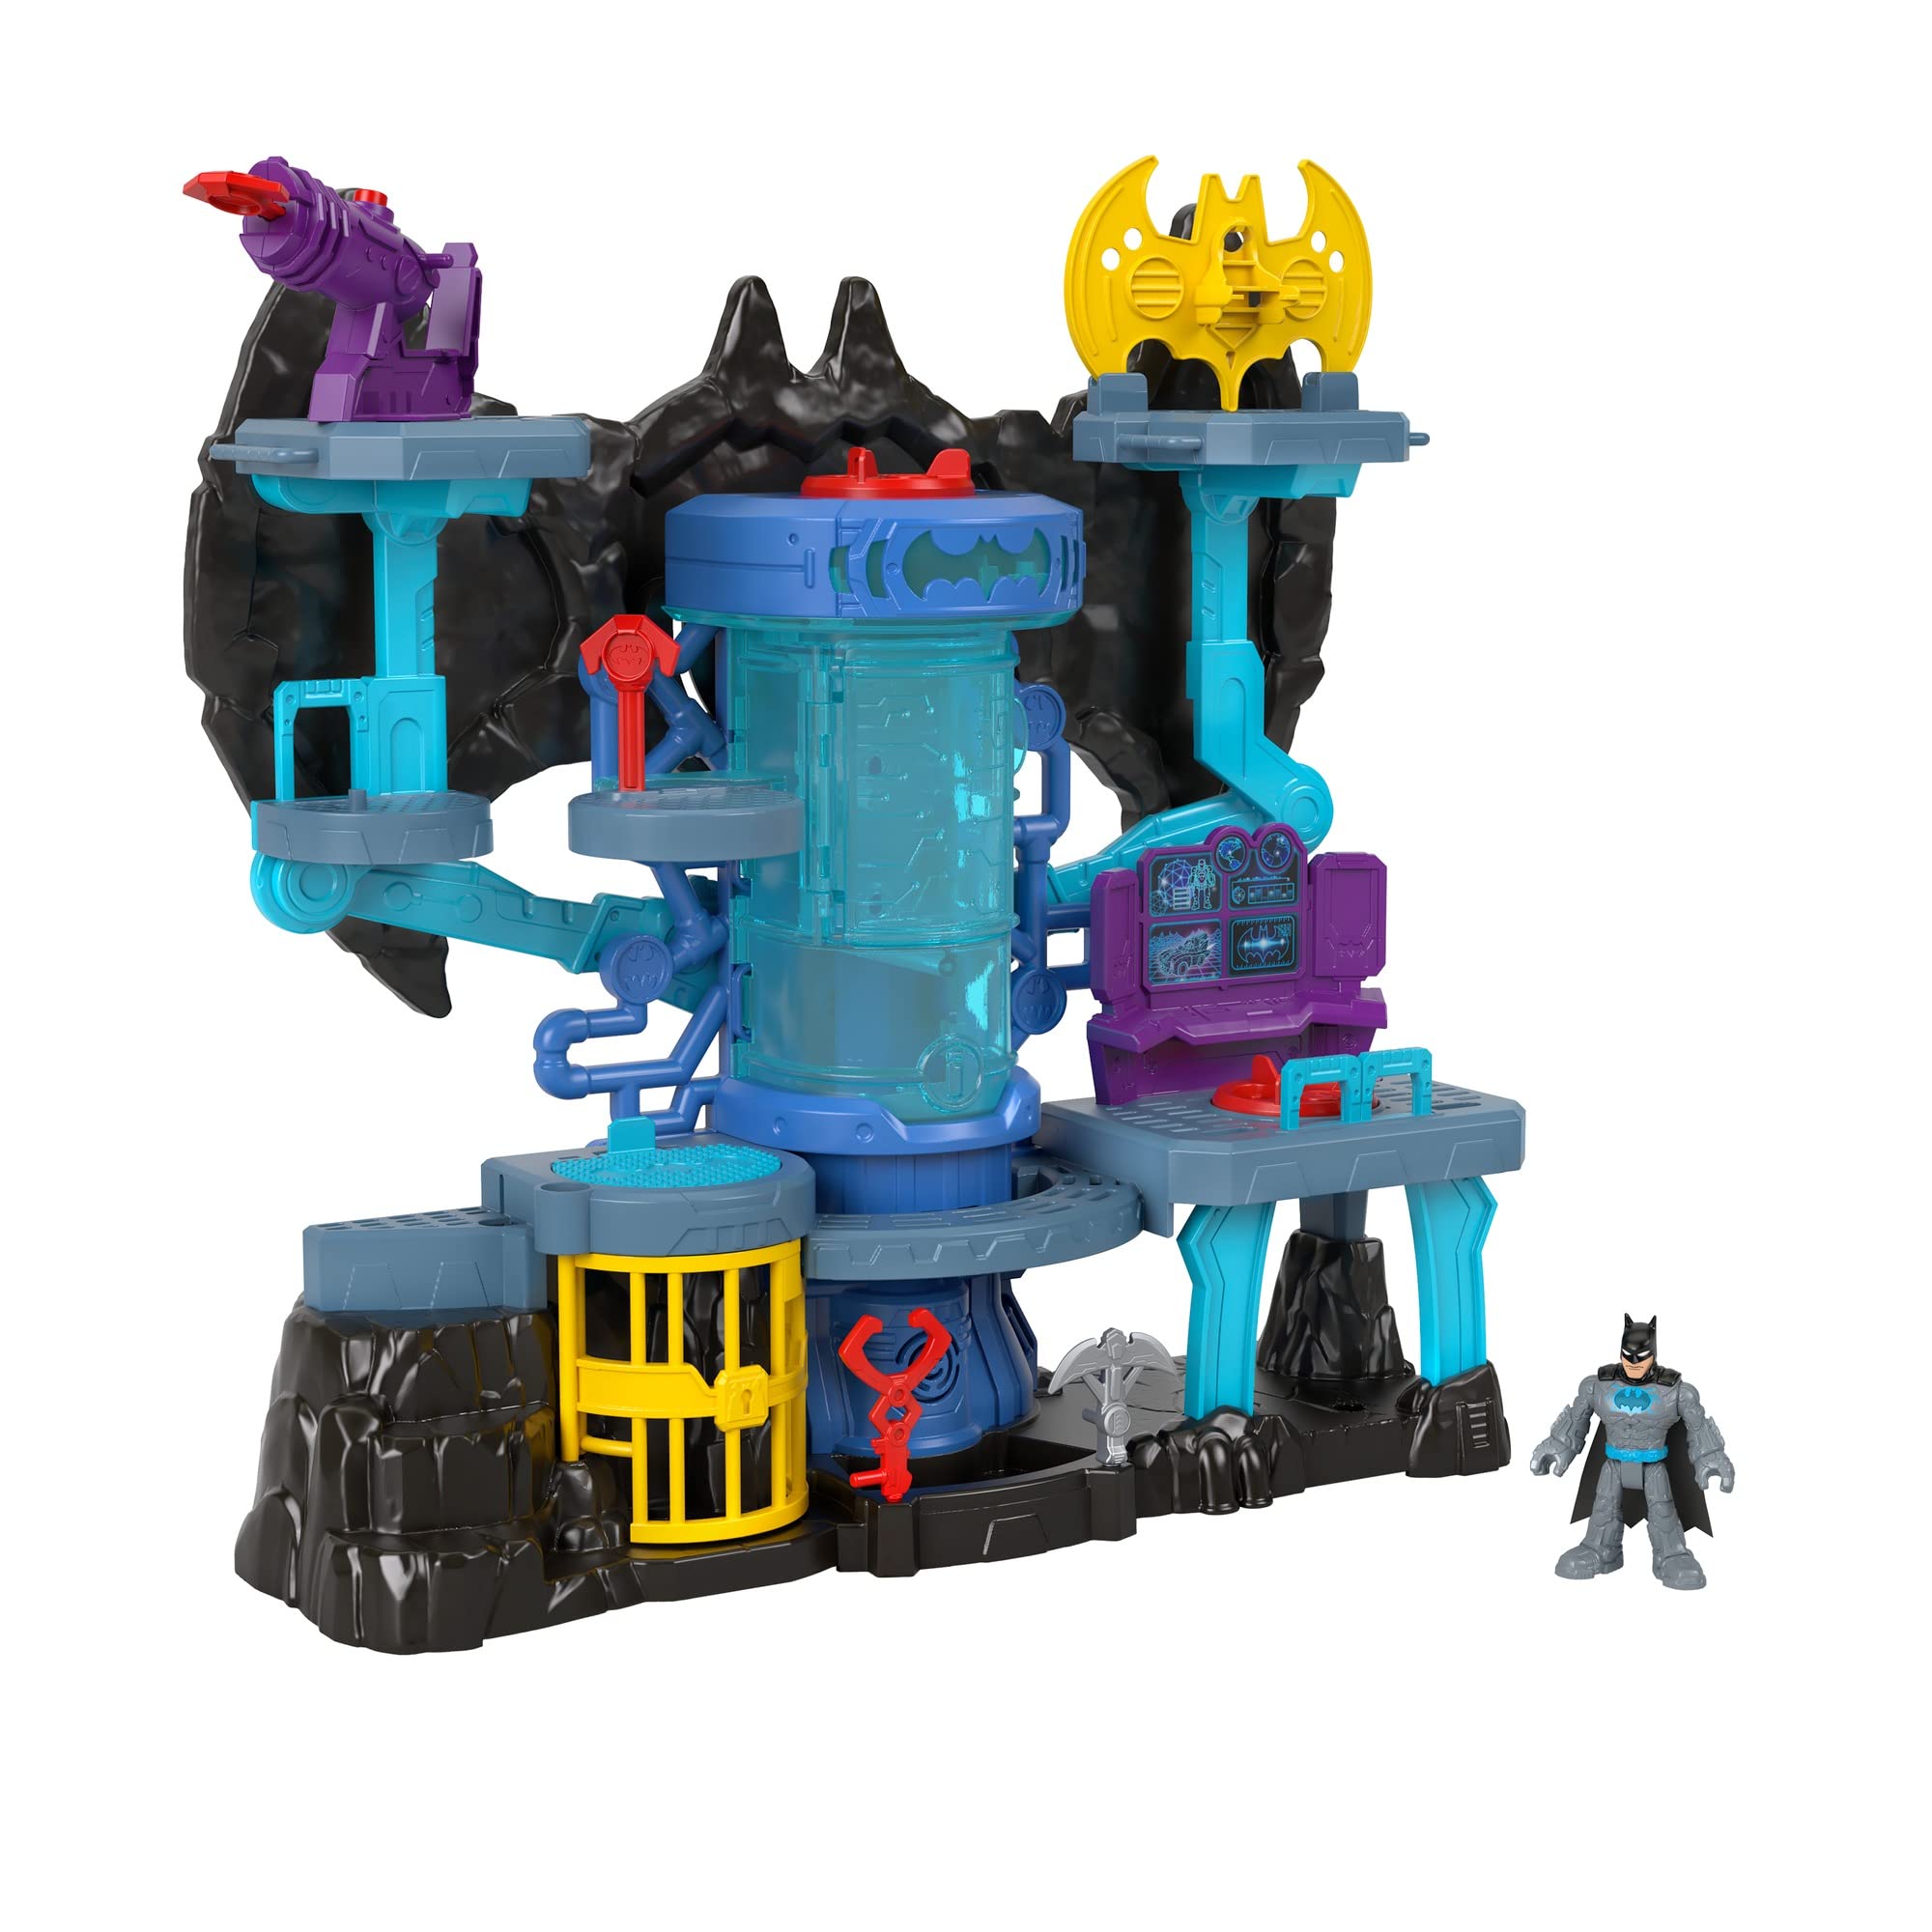 DC Comics Dc Super Friends Fisher-Price Imaginext Bat-Tech Batcave, Batman playset with Lights and Sounds for Kids Ages 3 to 8 Years, Meer